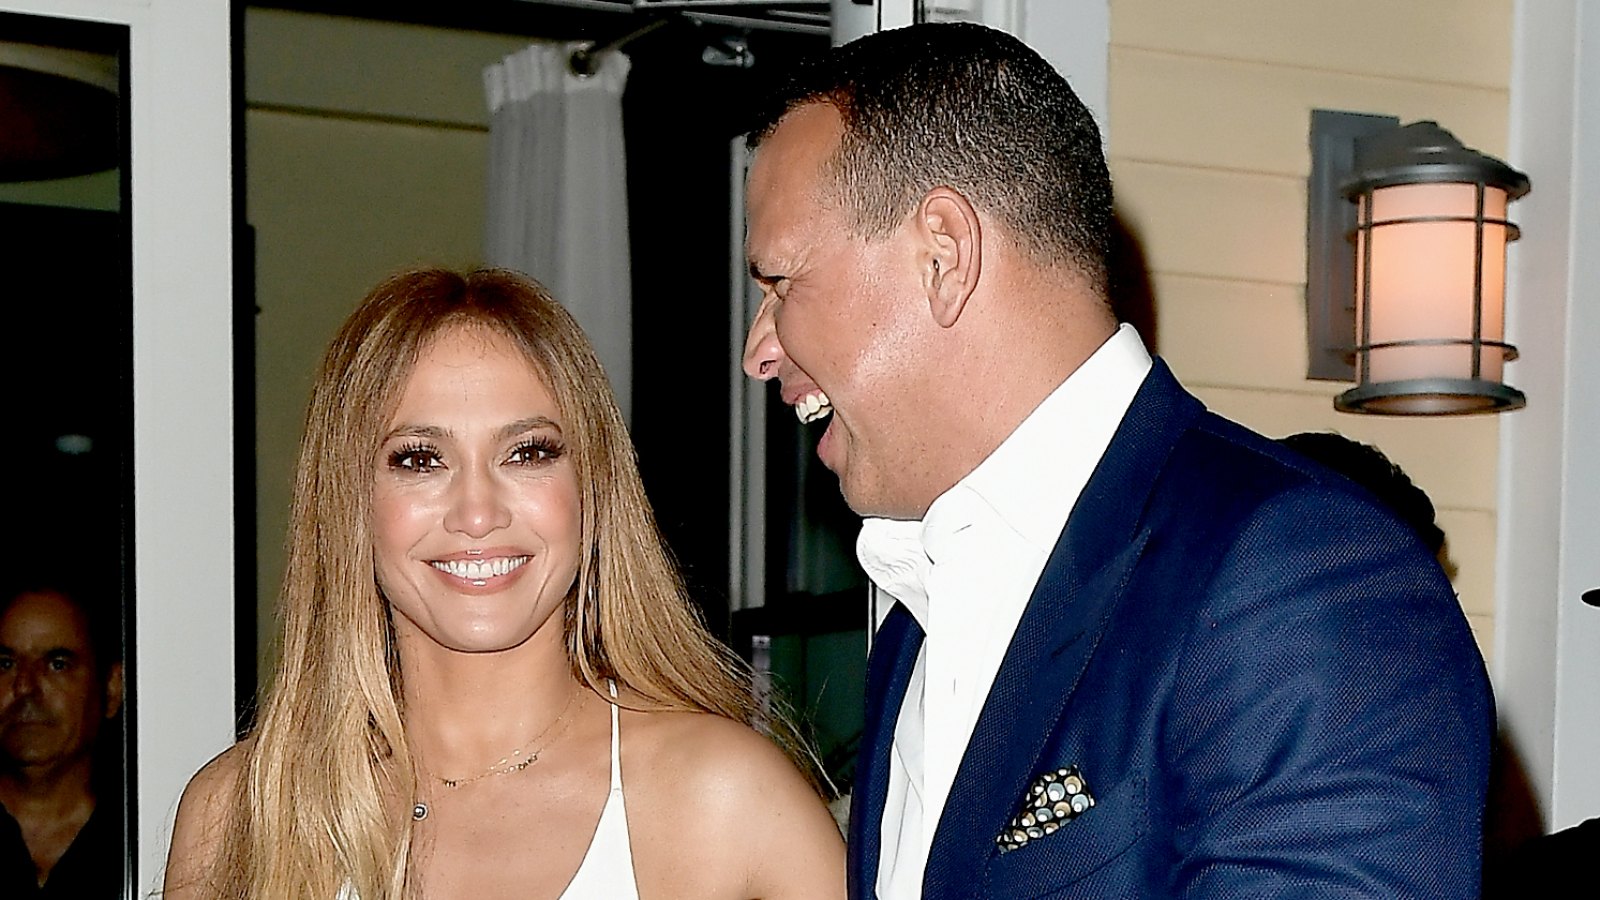 Jennifer Lopez and Alex Rodriguez attend Prime 112 Restaurant on July 23, 2017 in Miami, Florida.